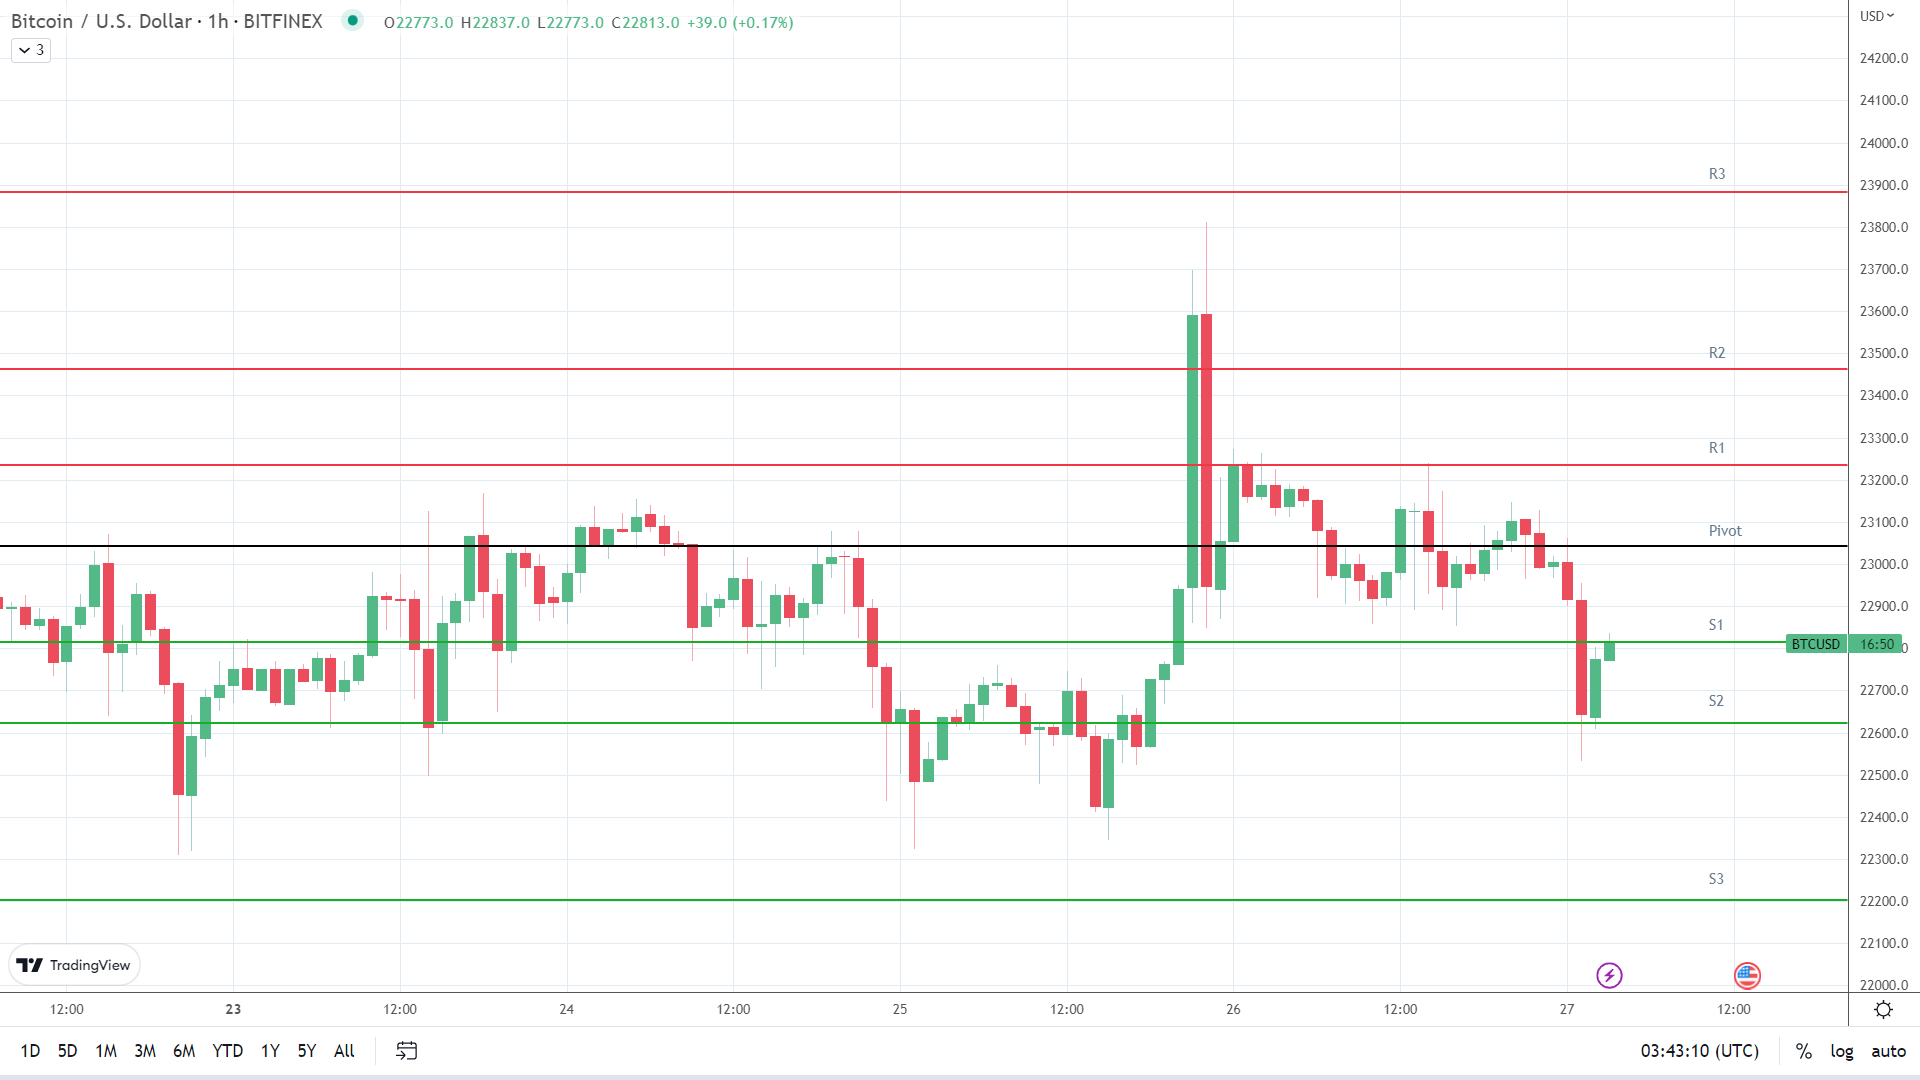 BTC support levels in play.